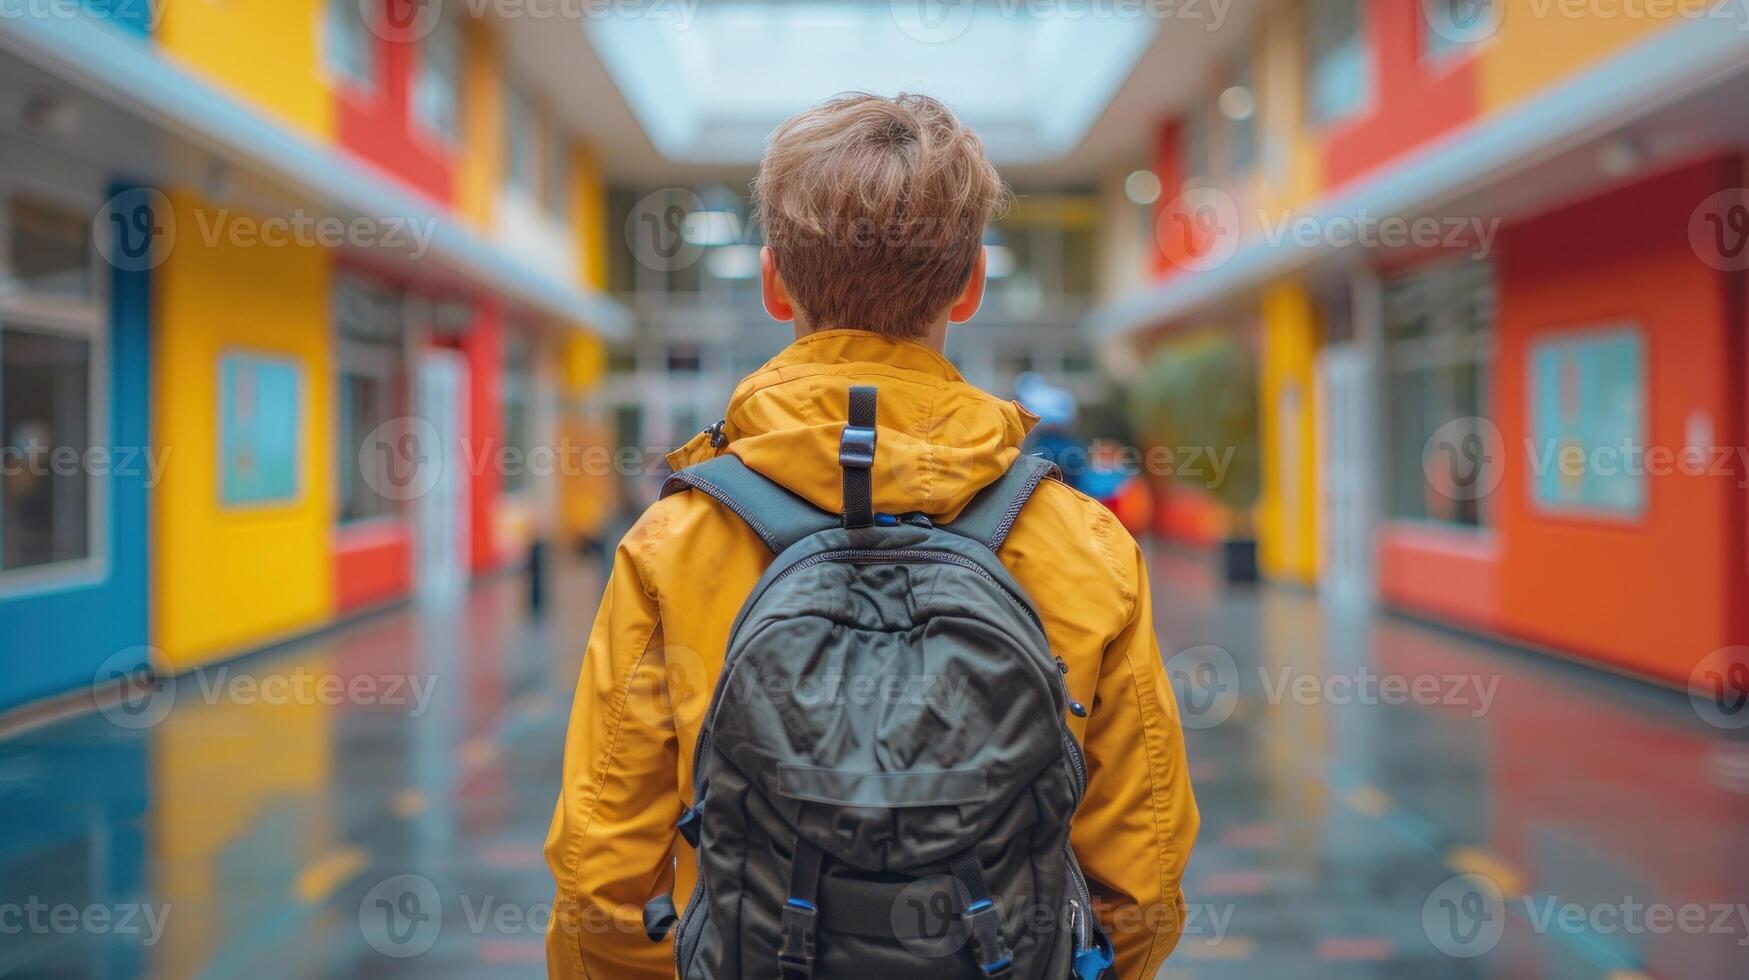 A young boy with a backpack walks down a hallway photo